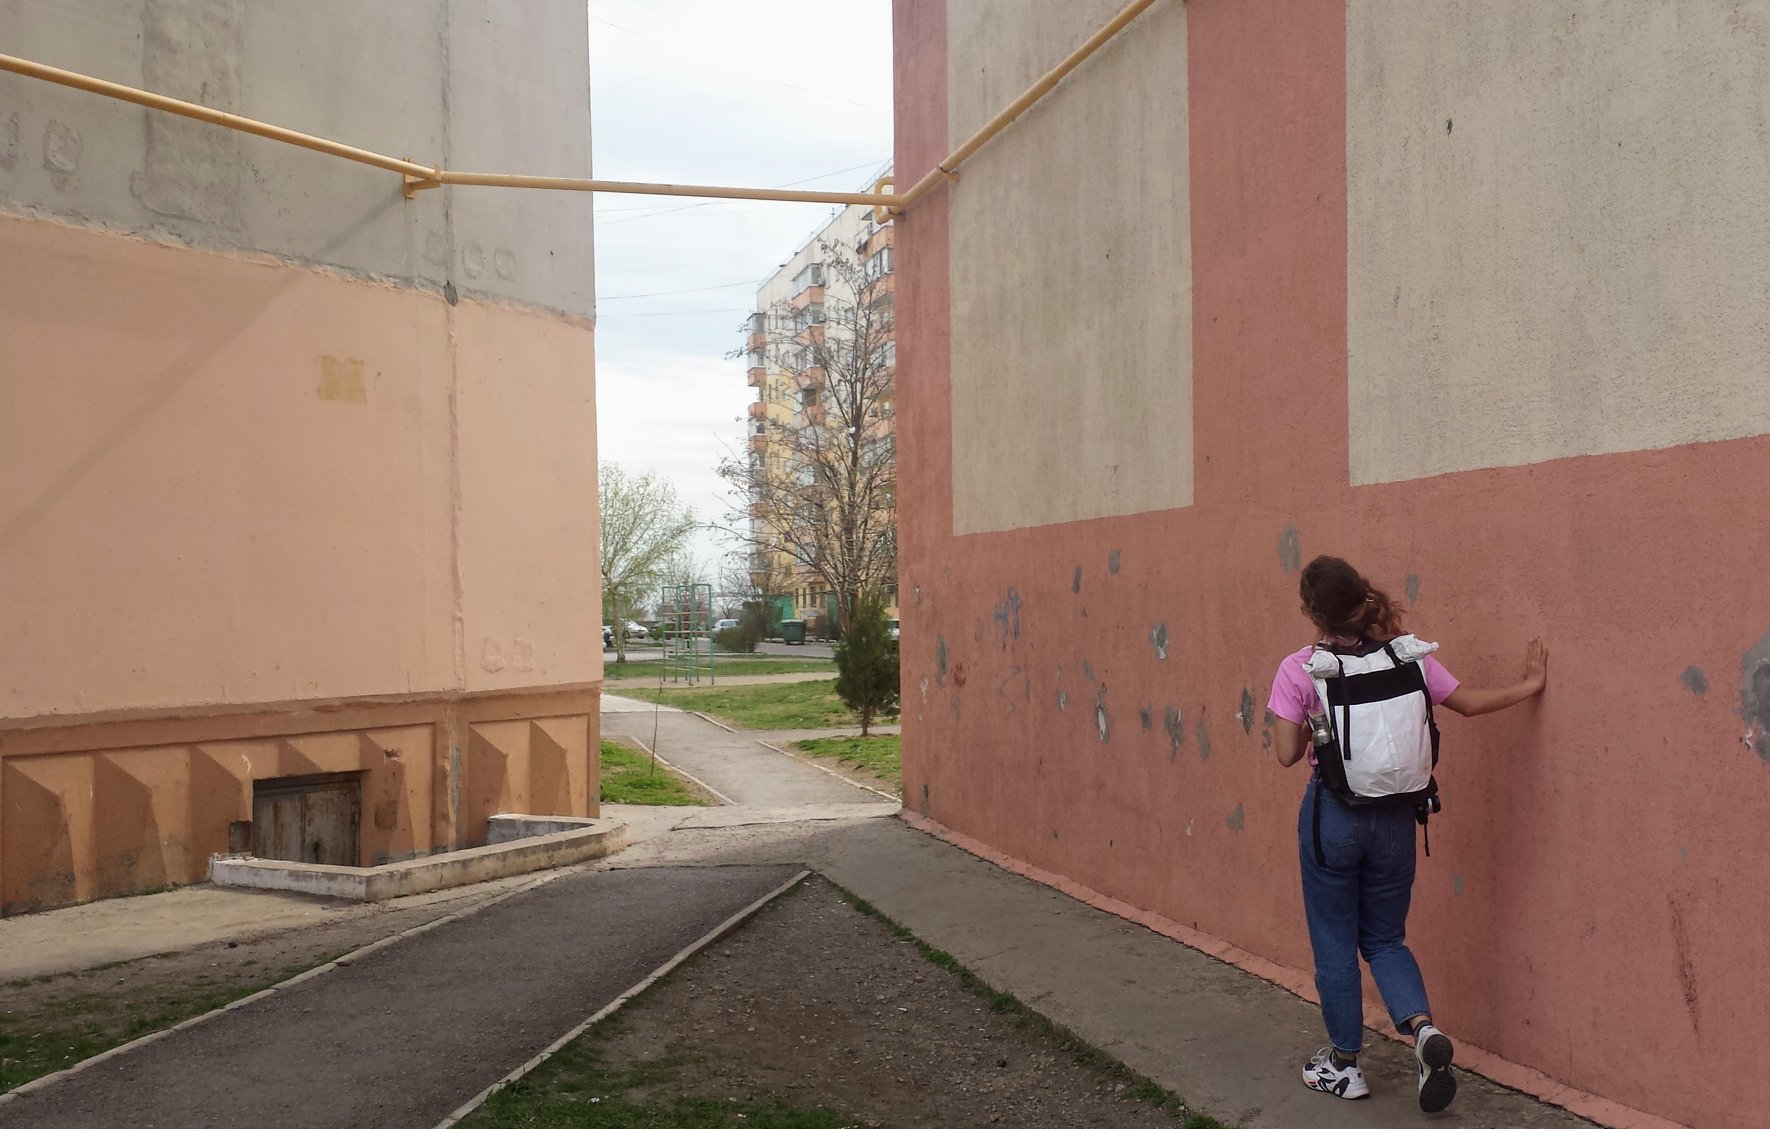 A shot of a person walking away through a path between two buildings. The person is wearing a pink t-shirt, dark blue jeans and a black and white backpack, they have their right hand tracing alongside the dark rose wall beside them.